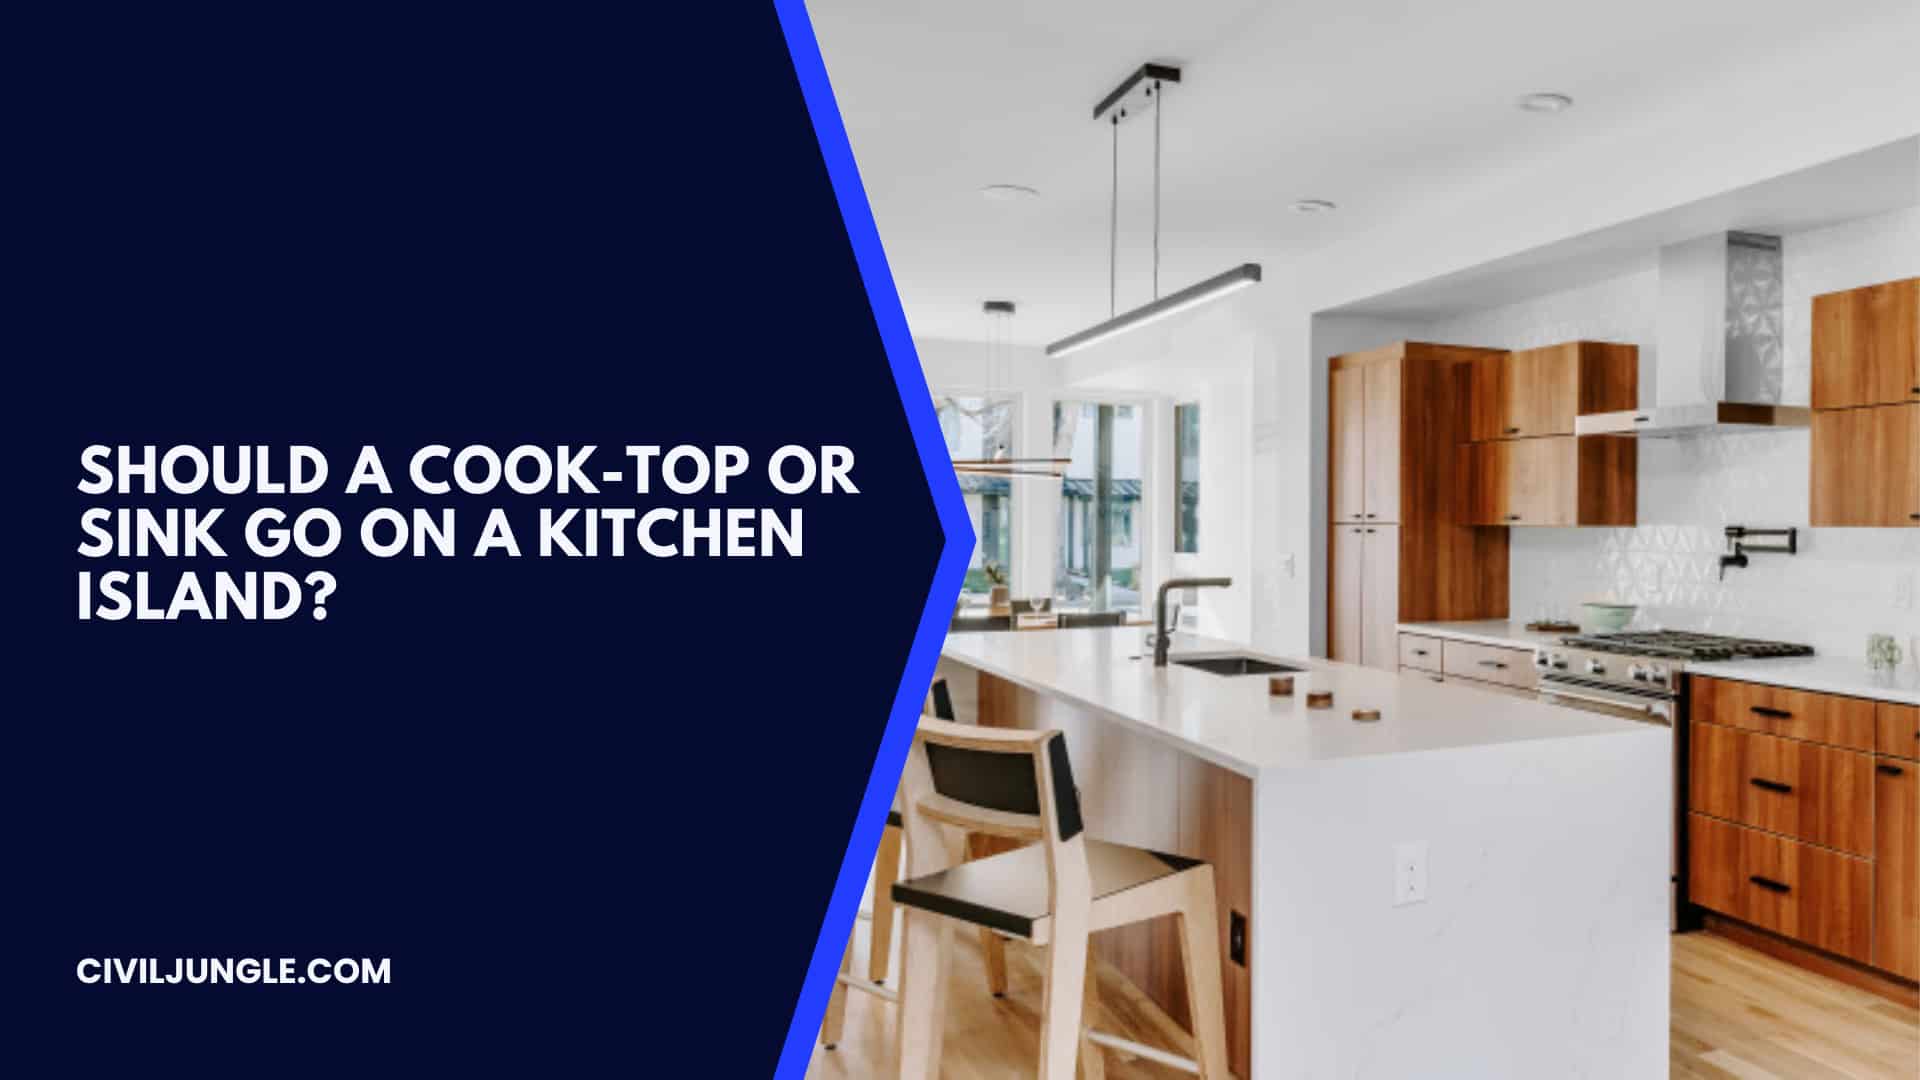 Should a Cook-Top or Sink Go on a Kitchen Island?